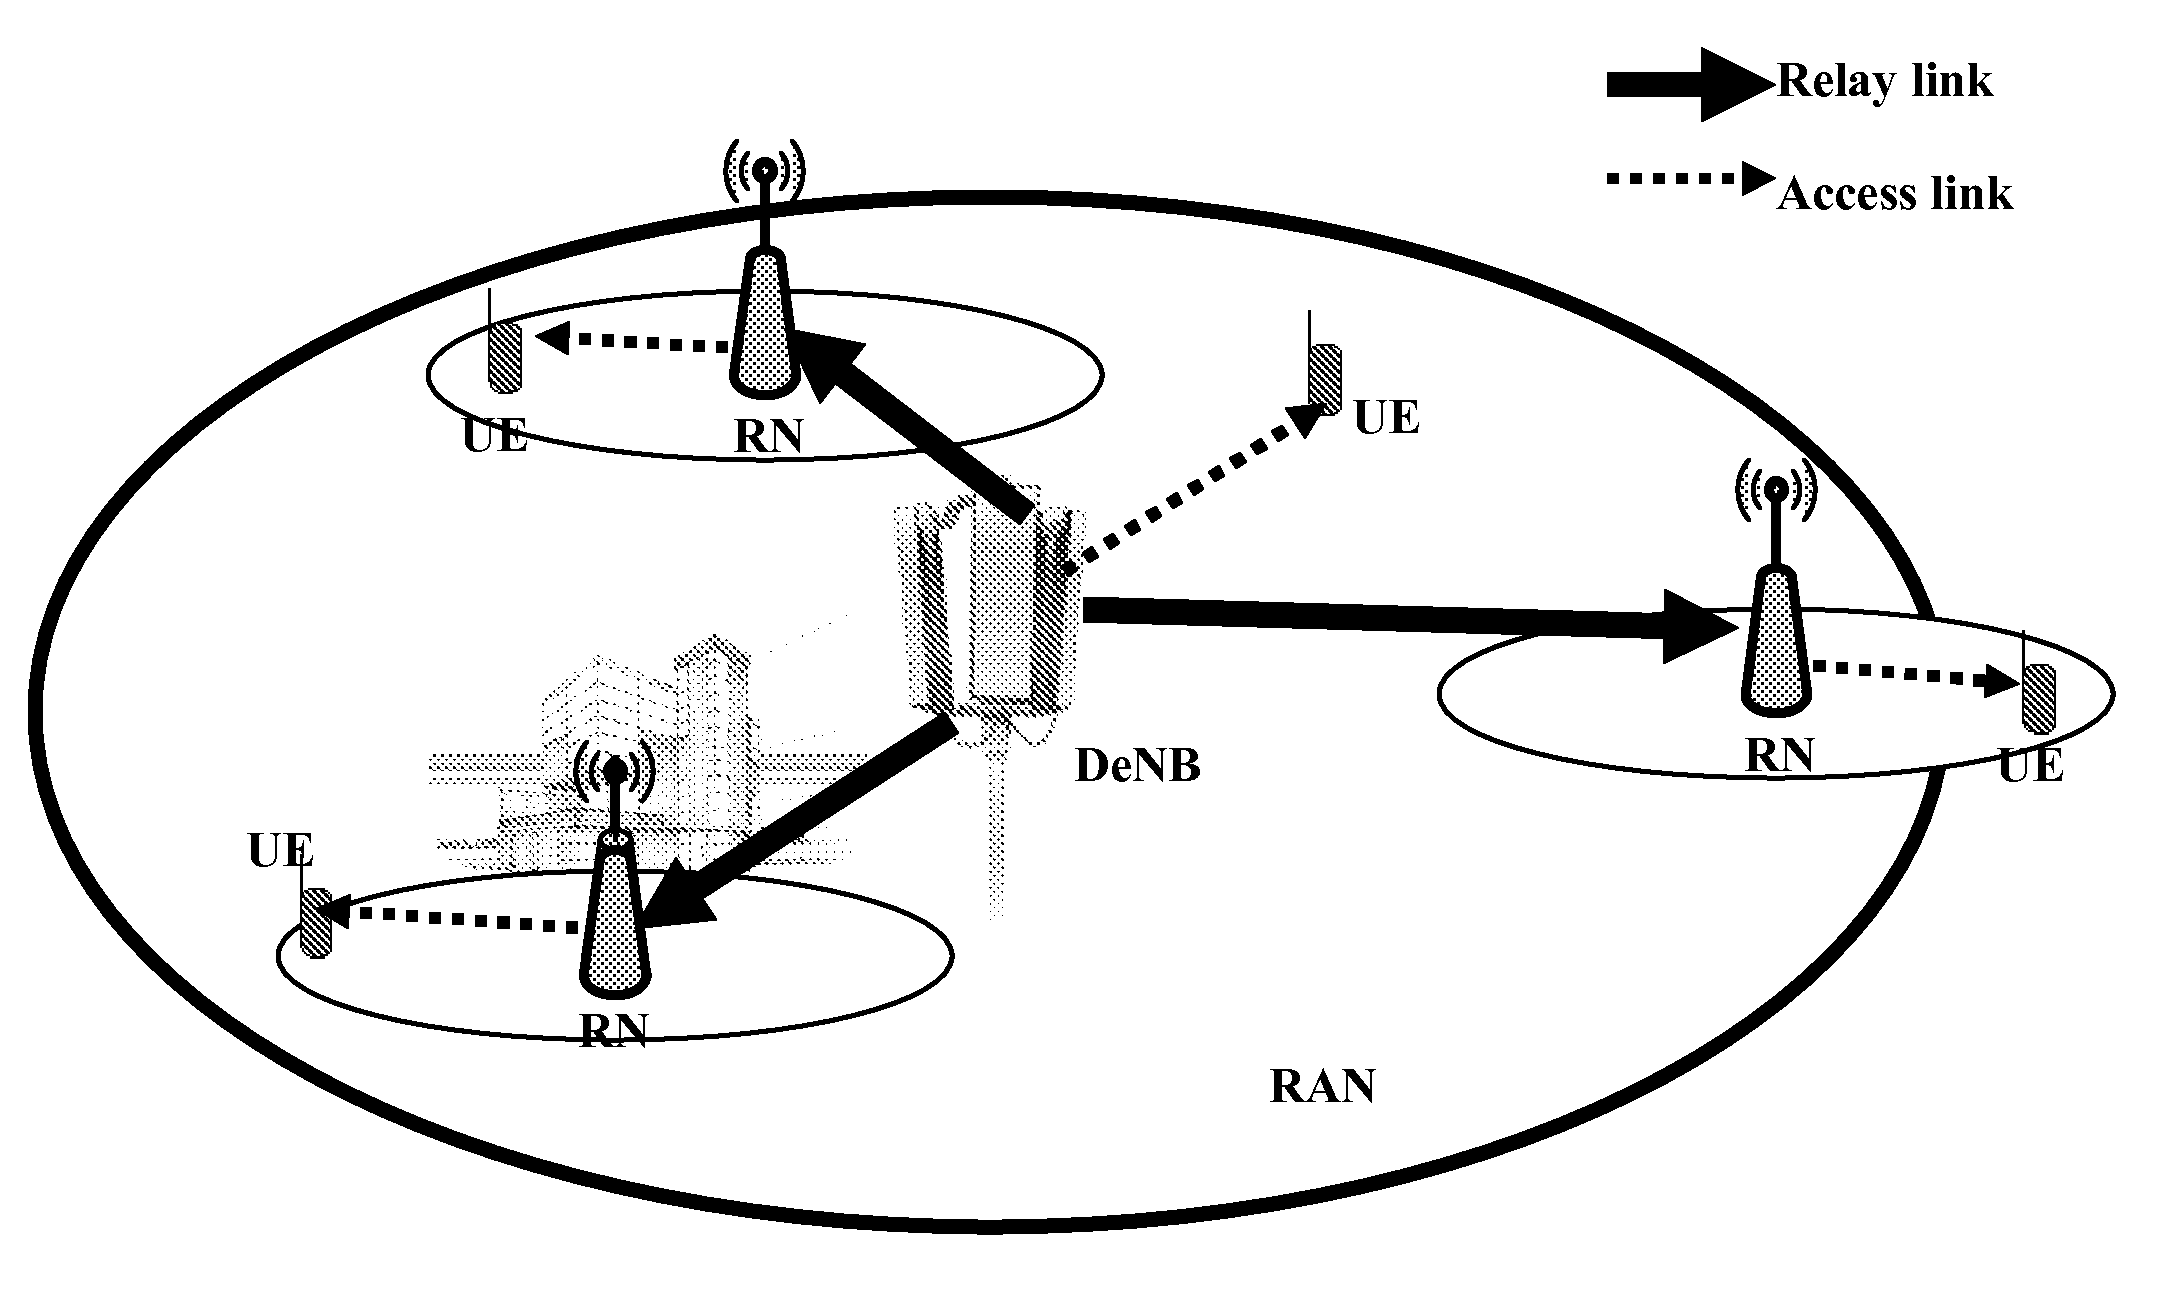 Handover control for networks with several types of backhaul connections